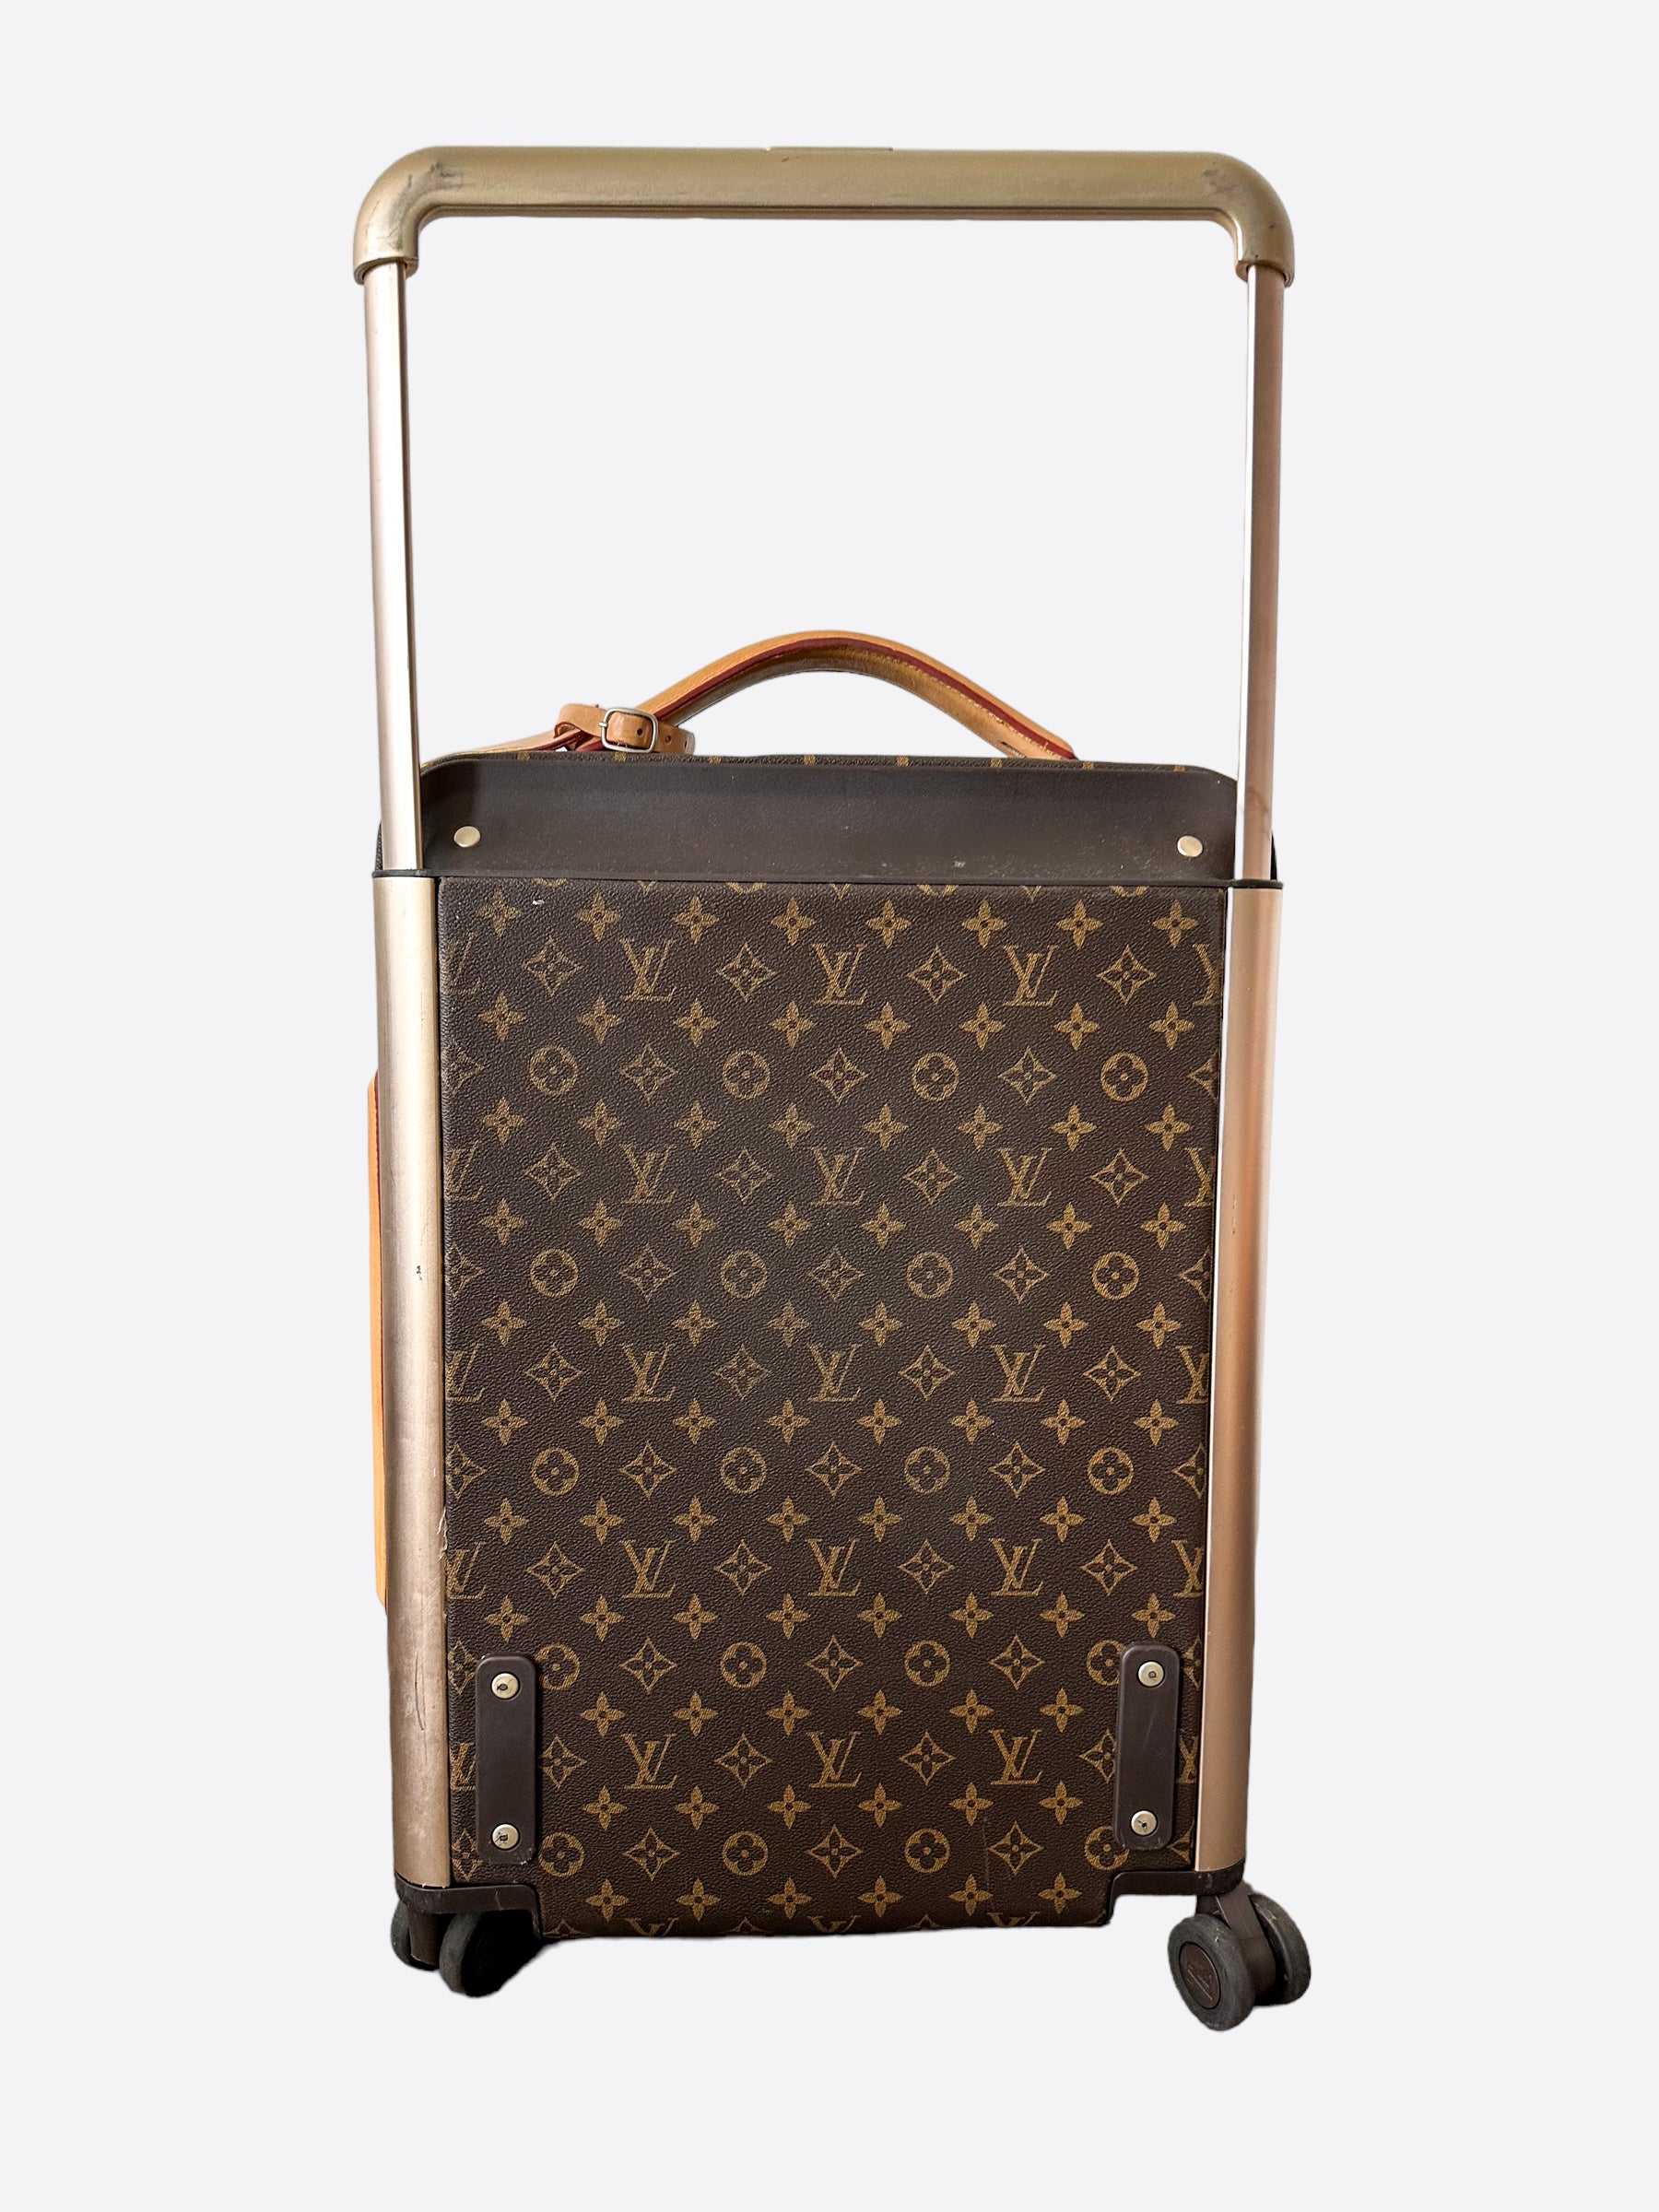 Buy Louis Vuitton Horizon 50 Monogram Carry Case Carry Bag M23209/DR0250  Brown No notation Brown from Japan - Buy authentic Plus exclusive items  from Japan